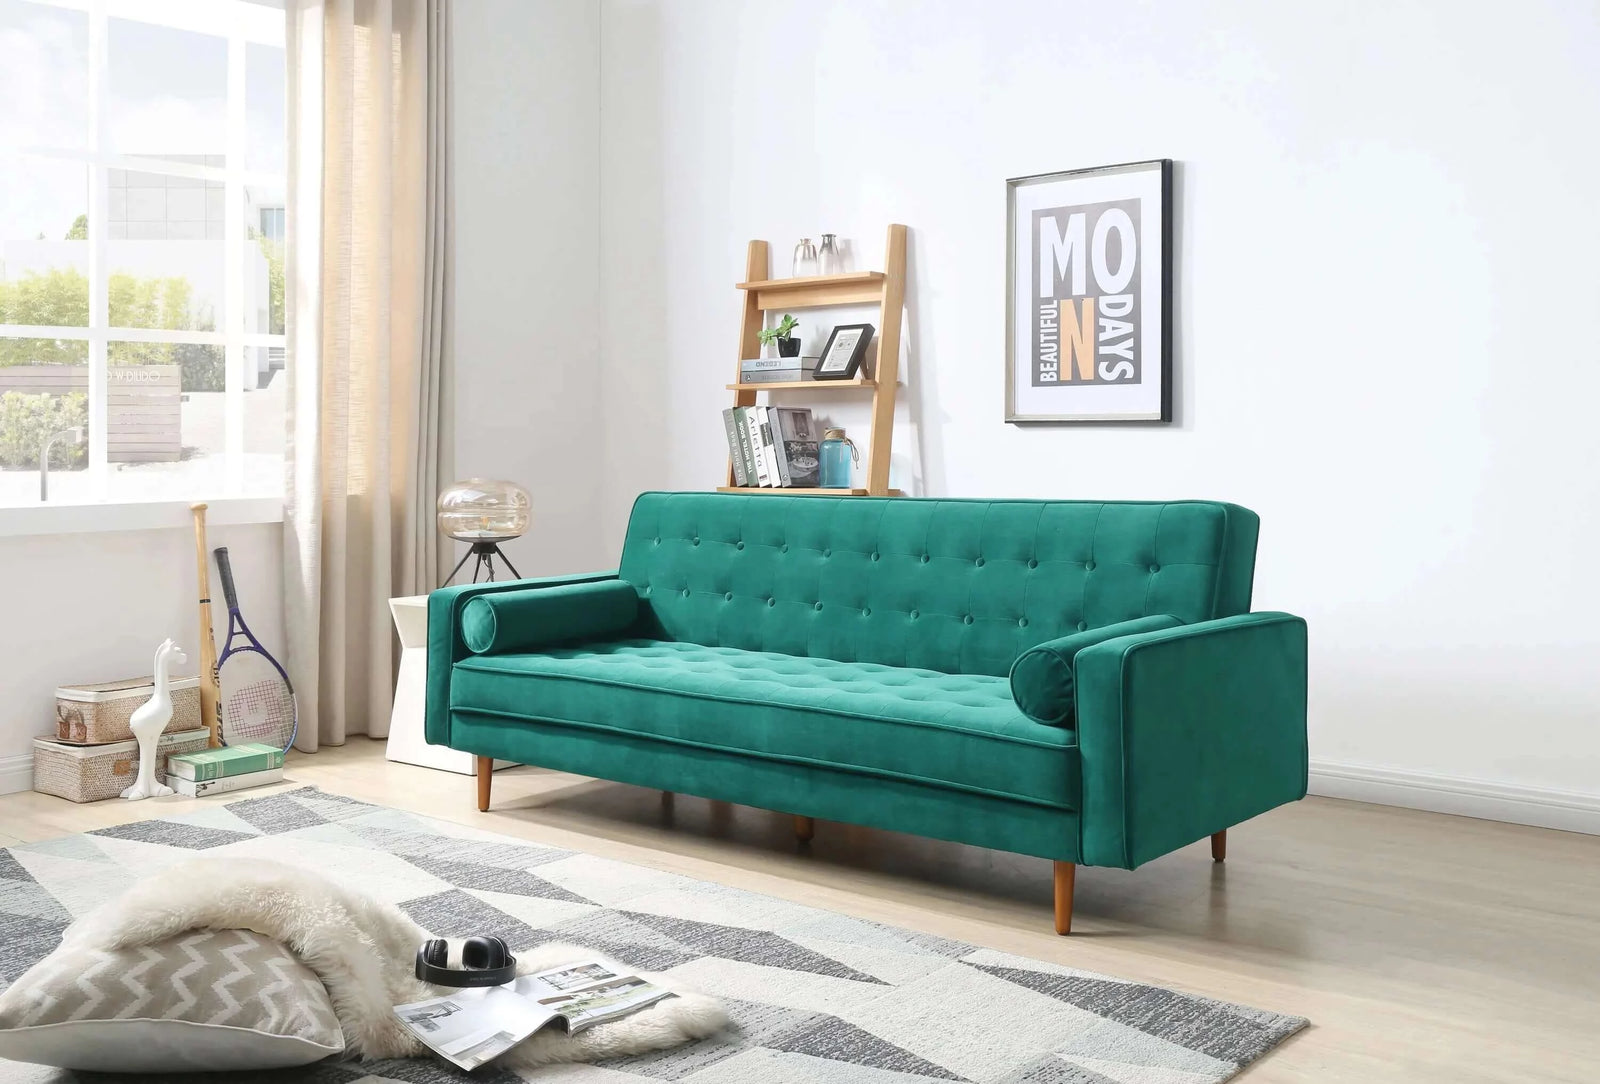 Buy sofa bed 3 seater button tufted lounge set for living room couch in velvet green colour - upinteriors-Upinteriors